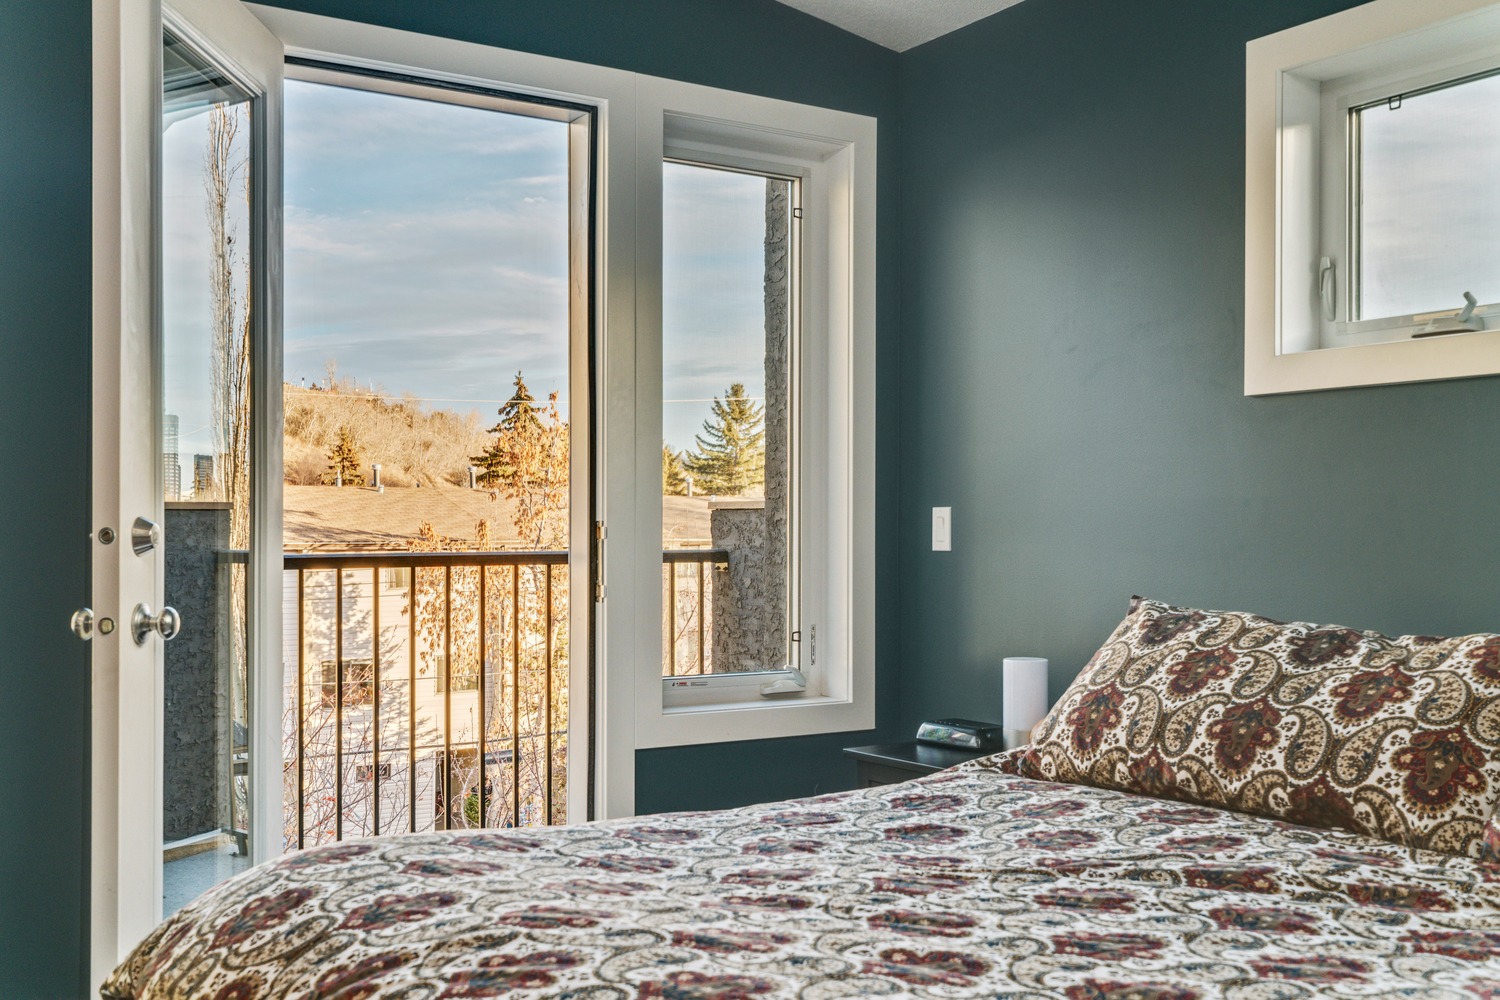 View overlooking Calgary from the third storey master bedroom in this inner-city home